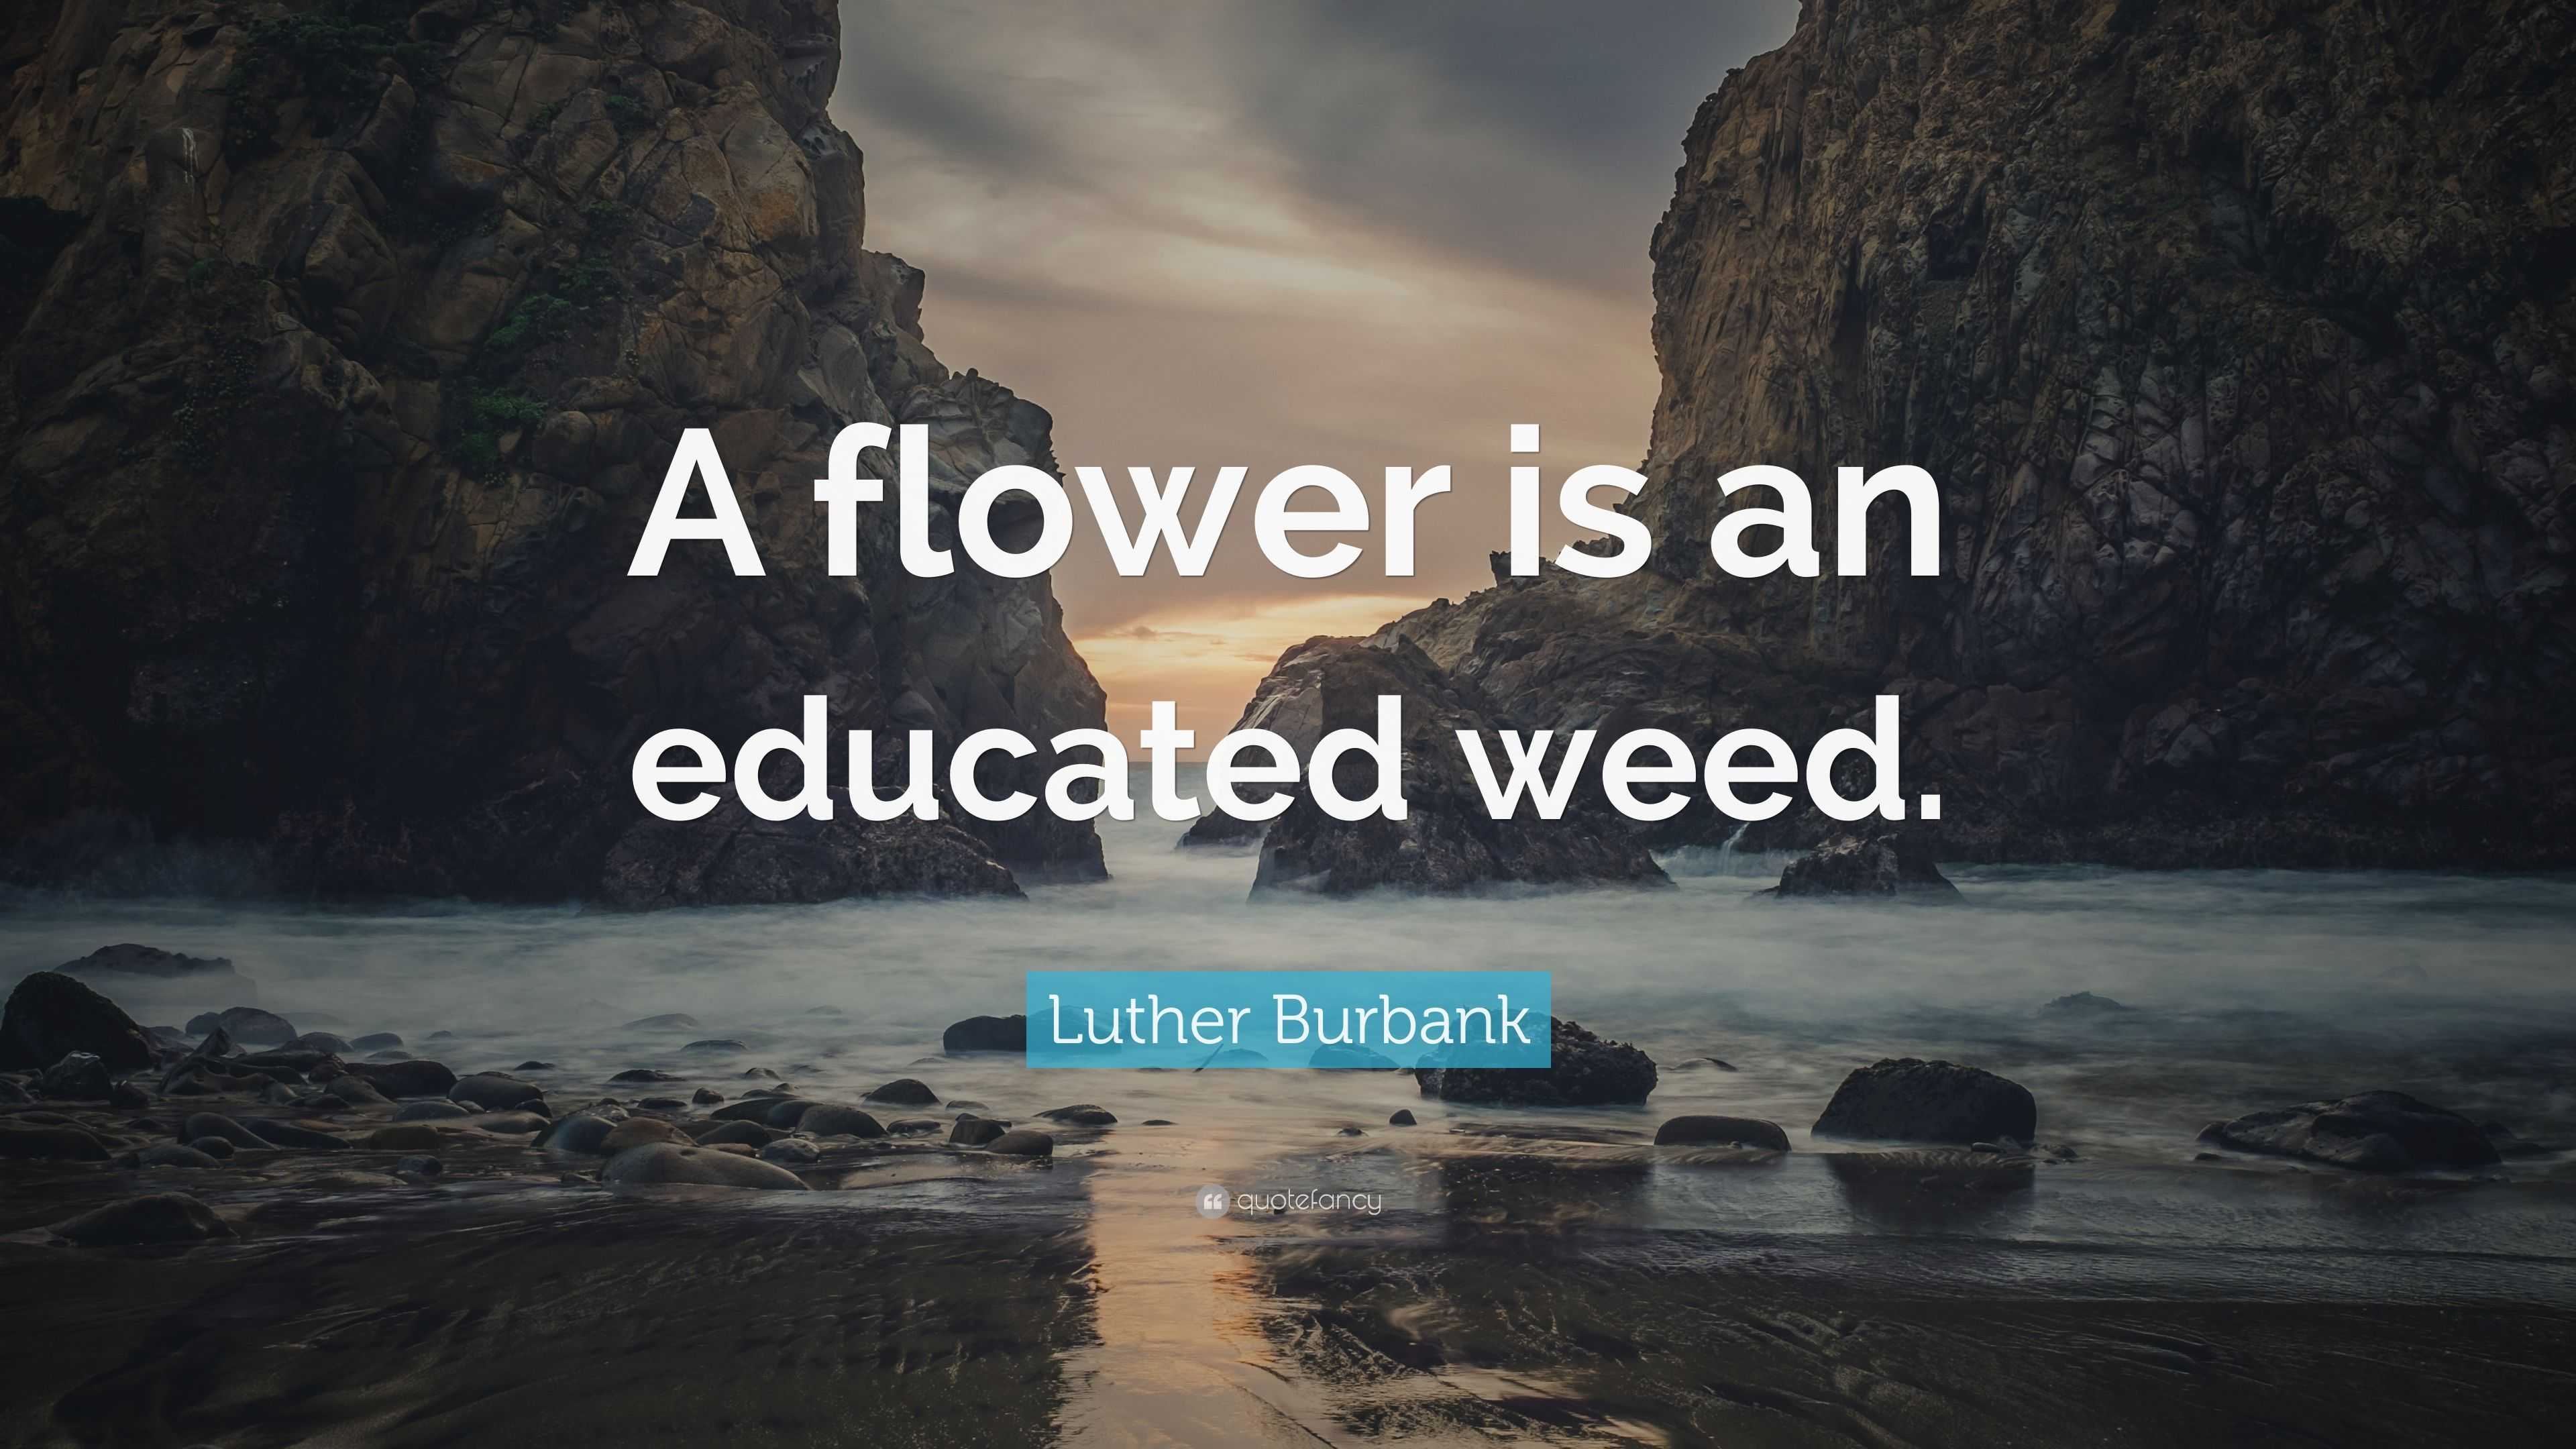 Luther Burbank Quote: "A flower is an educated weed." (7 wallpapers) - Quotefancy